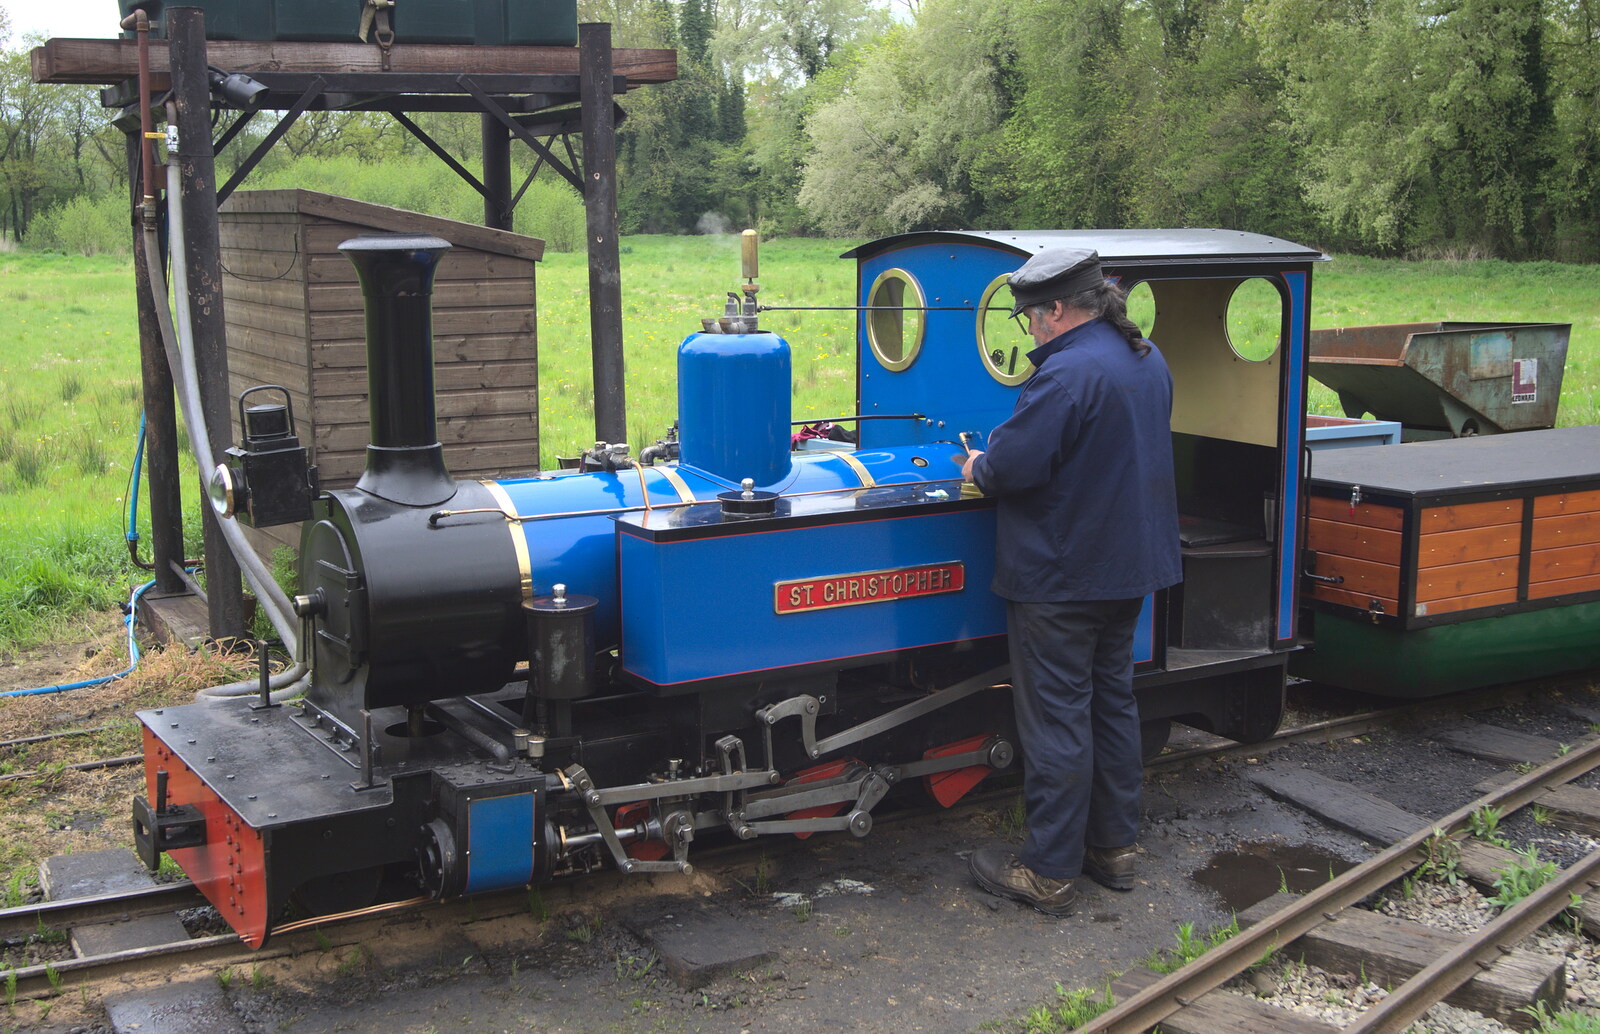 The St. Christopher is made ready for a trip from A Day at Bressingham Steam and Gardens, Diss, Norfolk - 18th May 2013